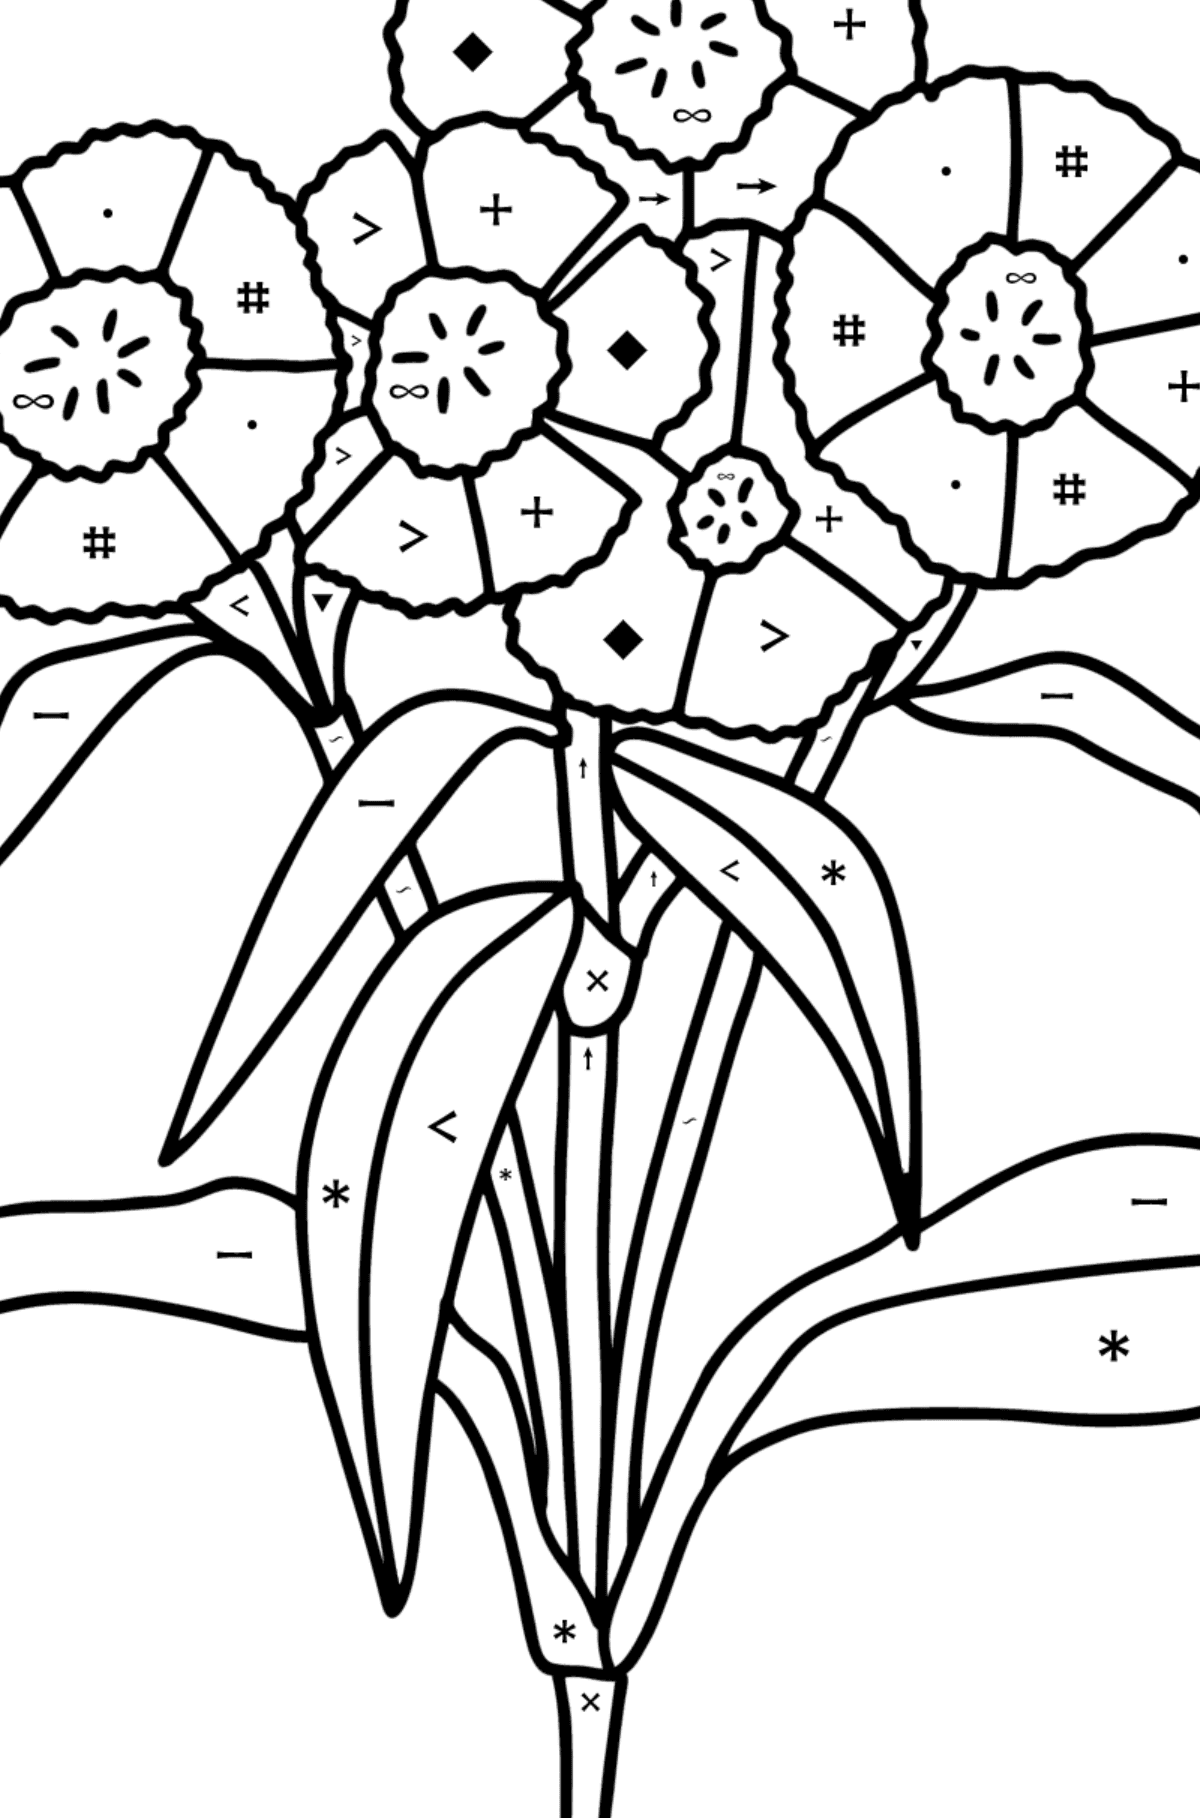 Carnations coloring page - Coloring by Symbols for Kids